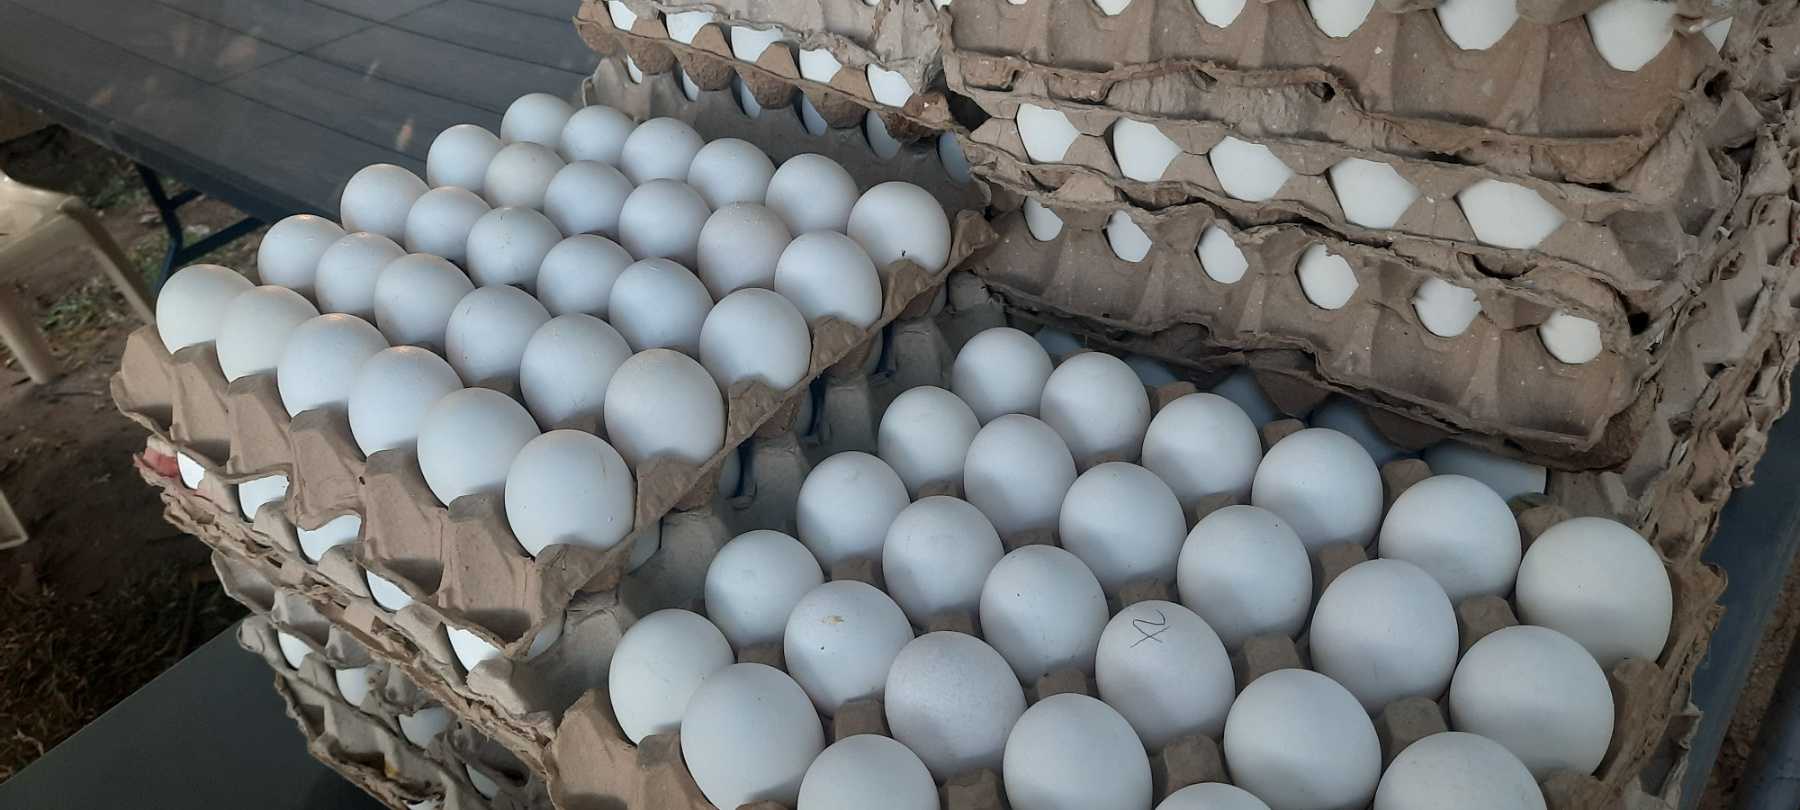 Prices on eggs increase due to low supply, higher demand